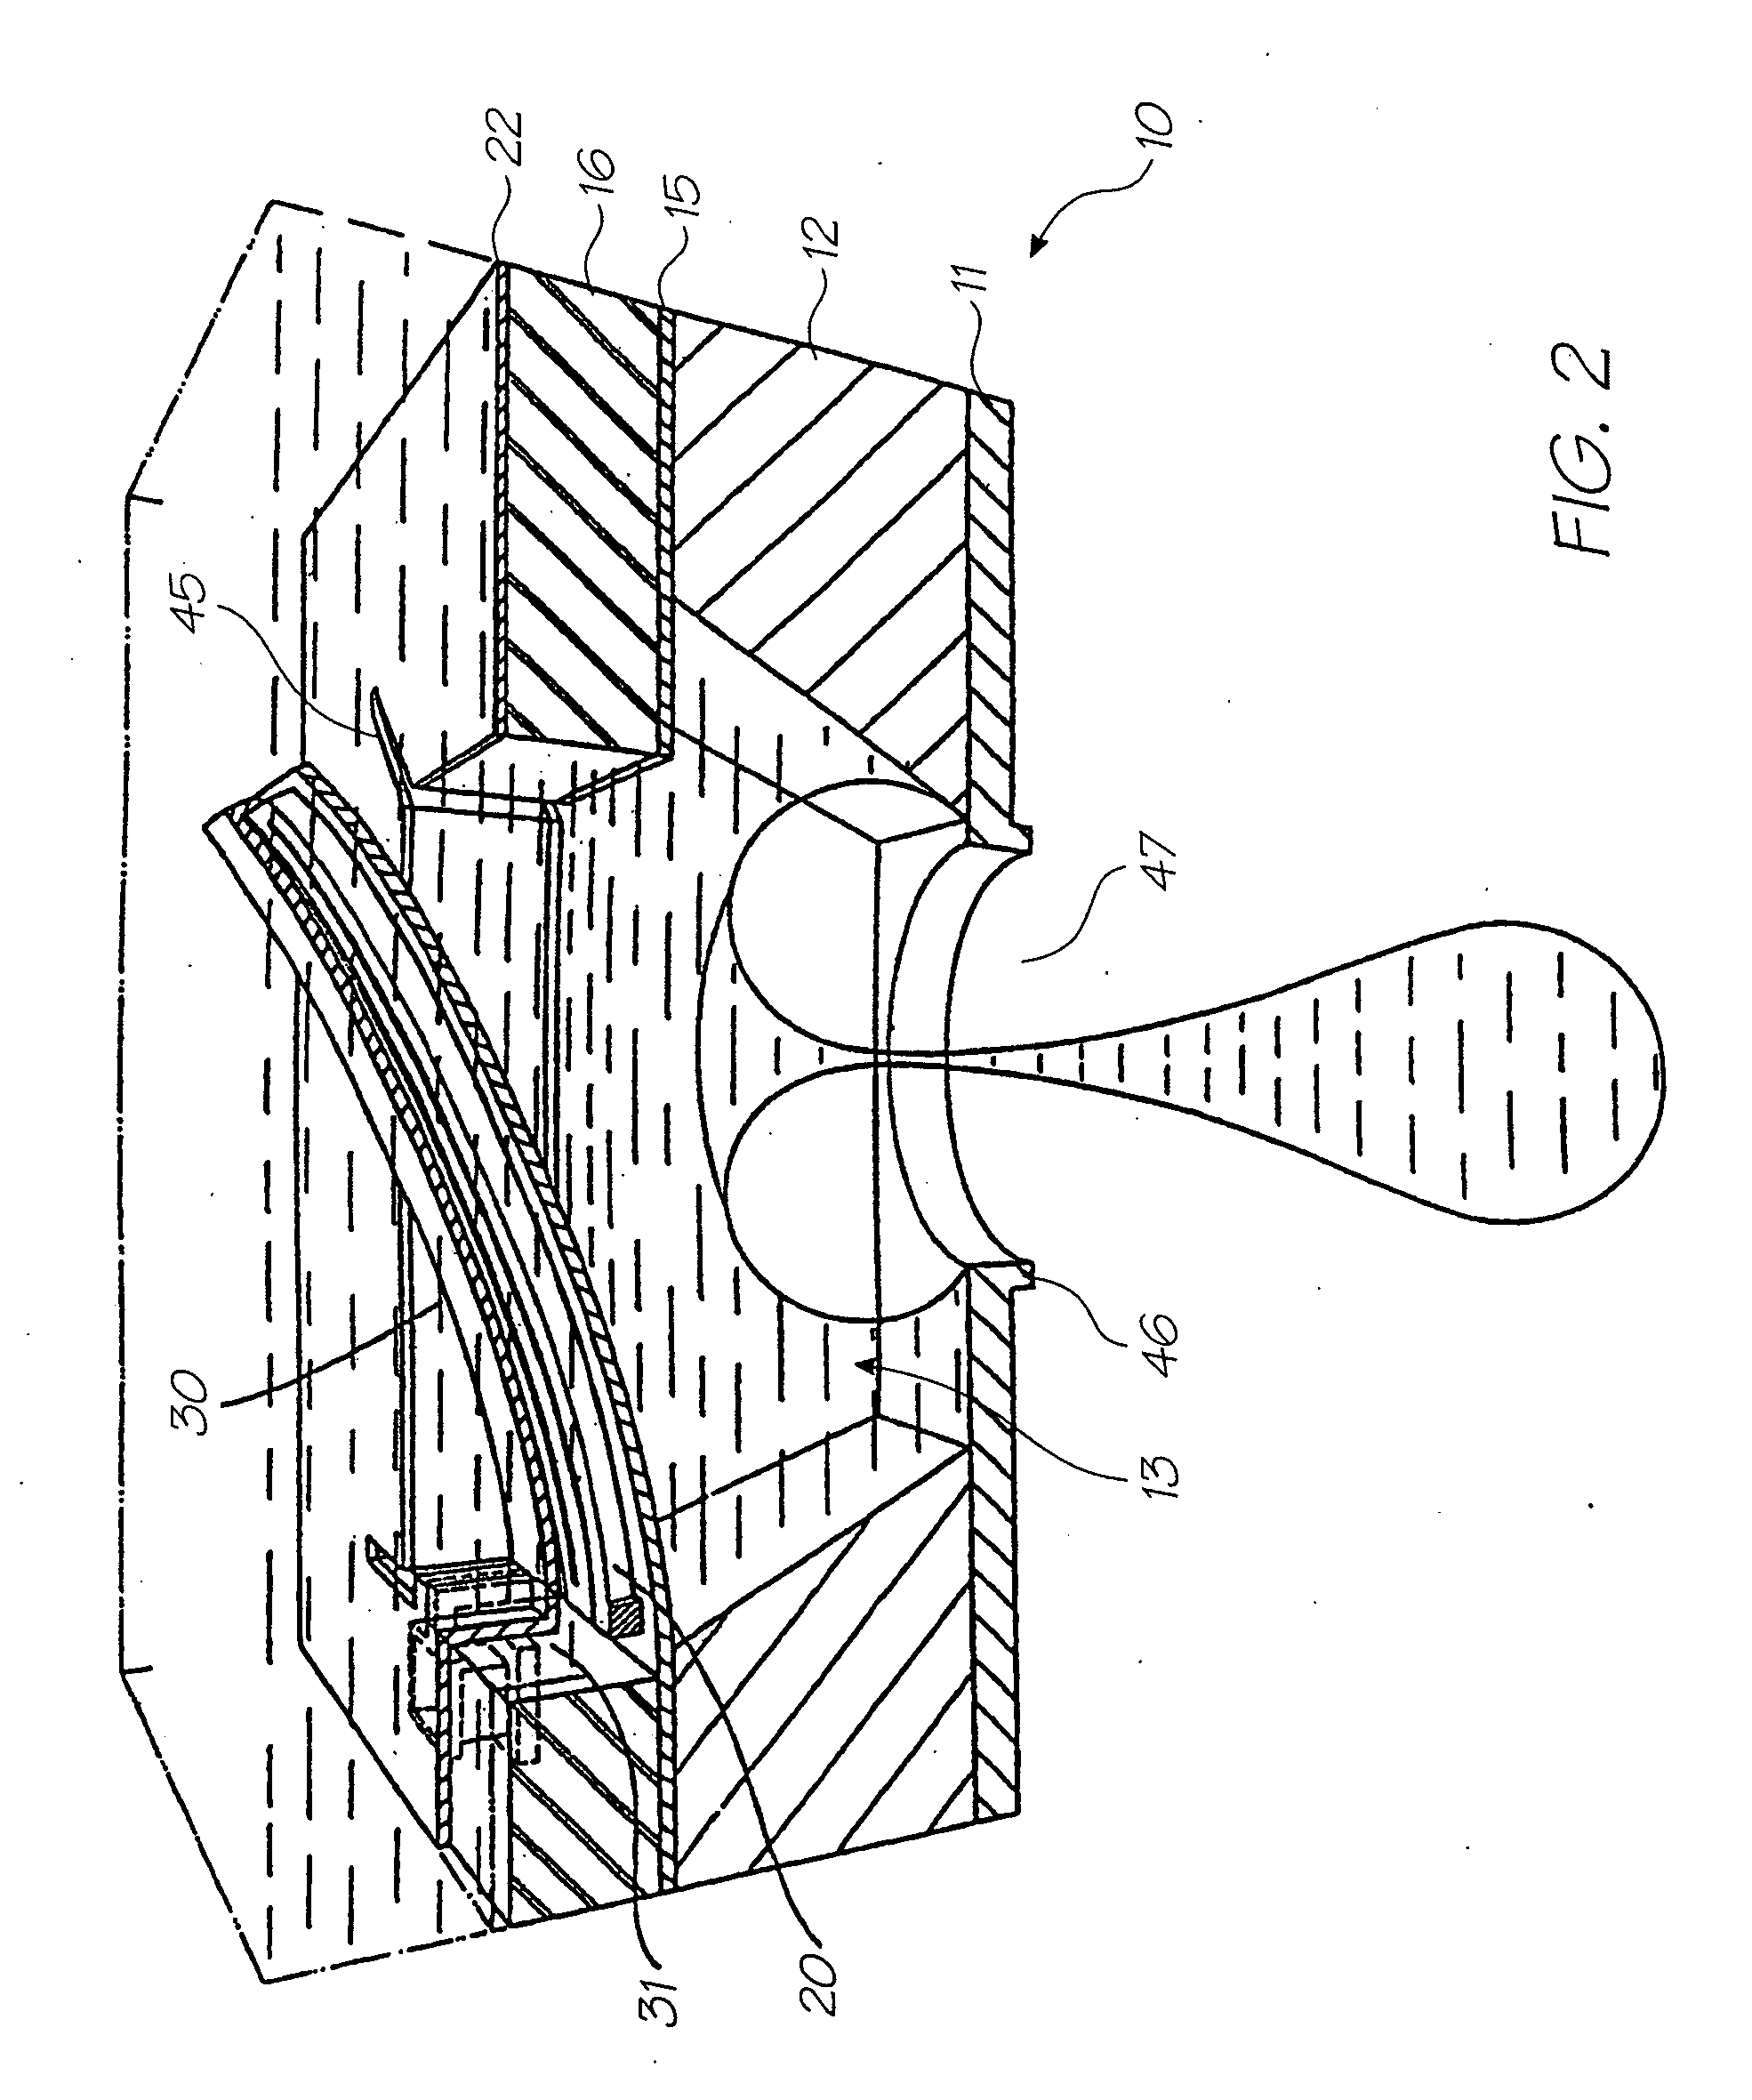 Printhead integrated circuit with small nozzle apertures